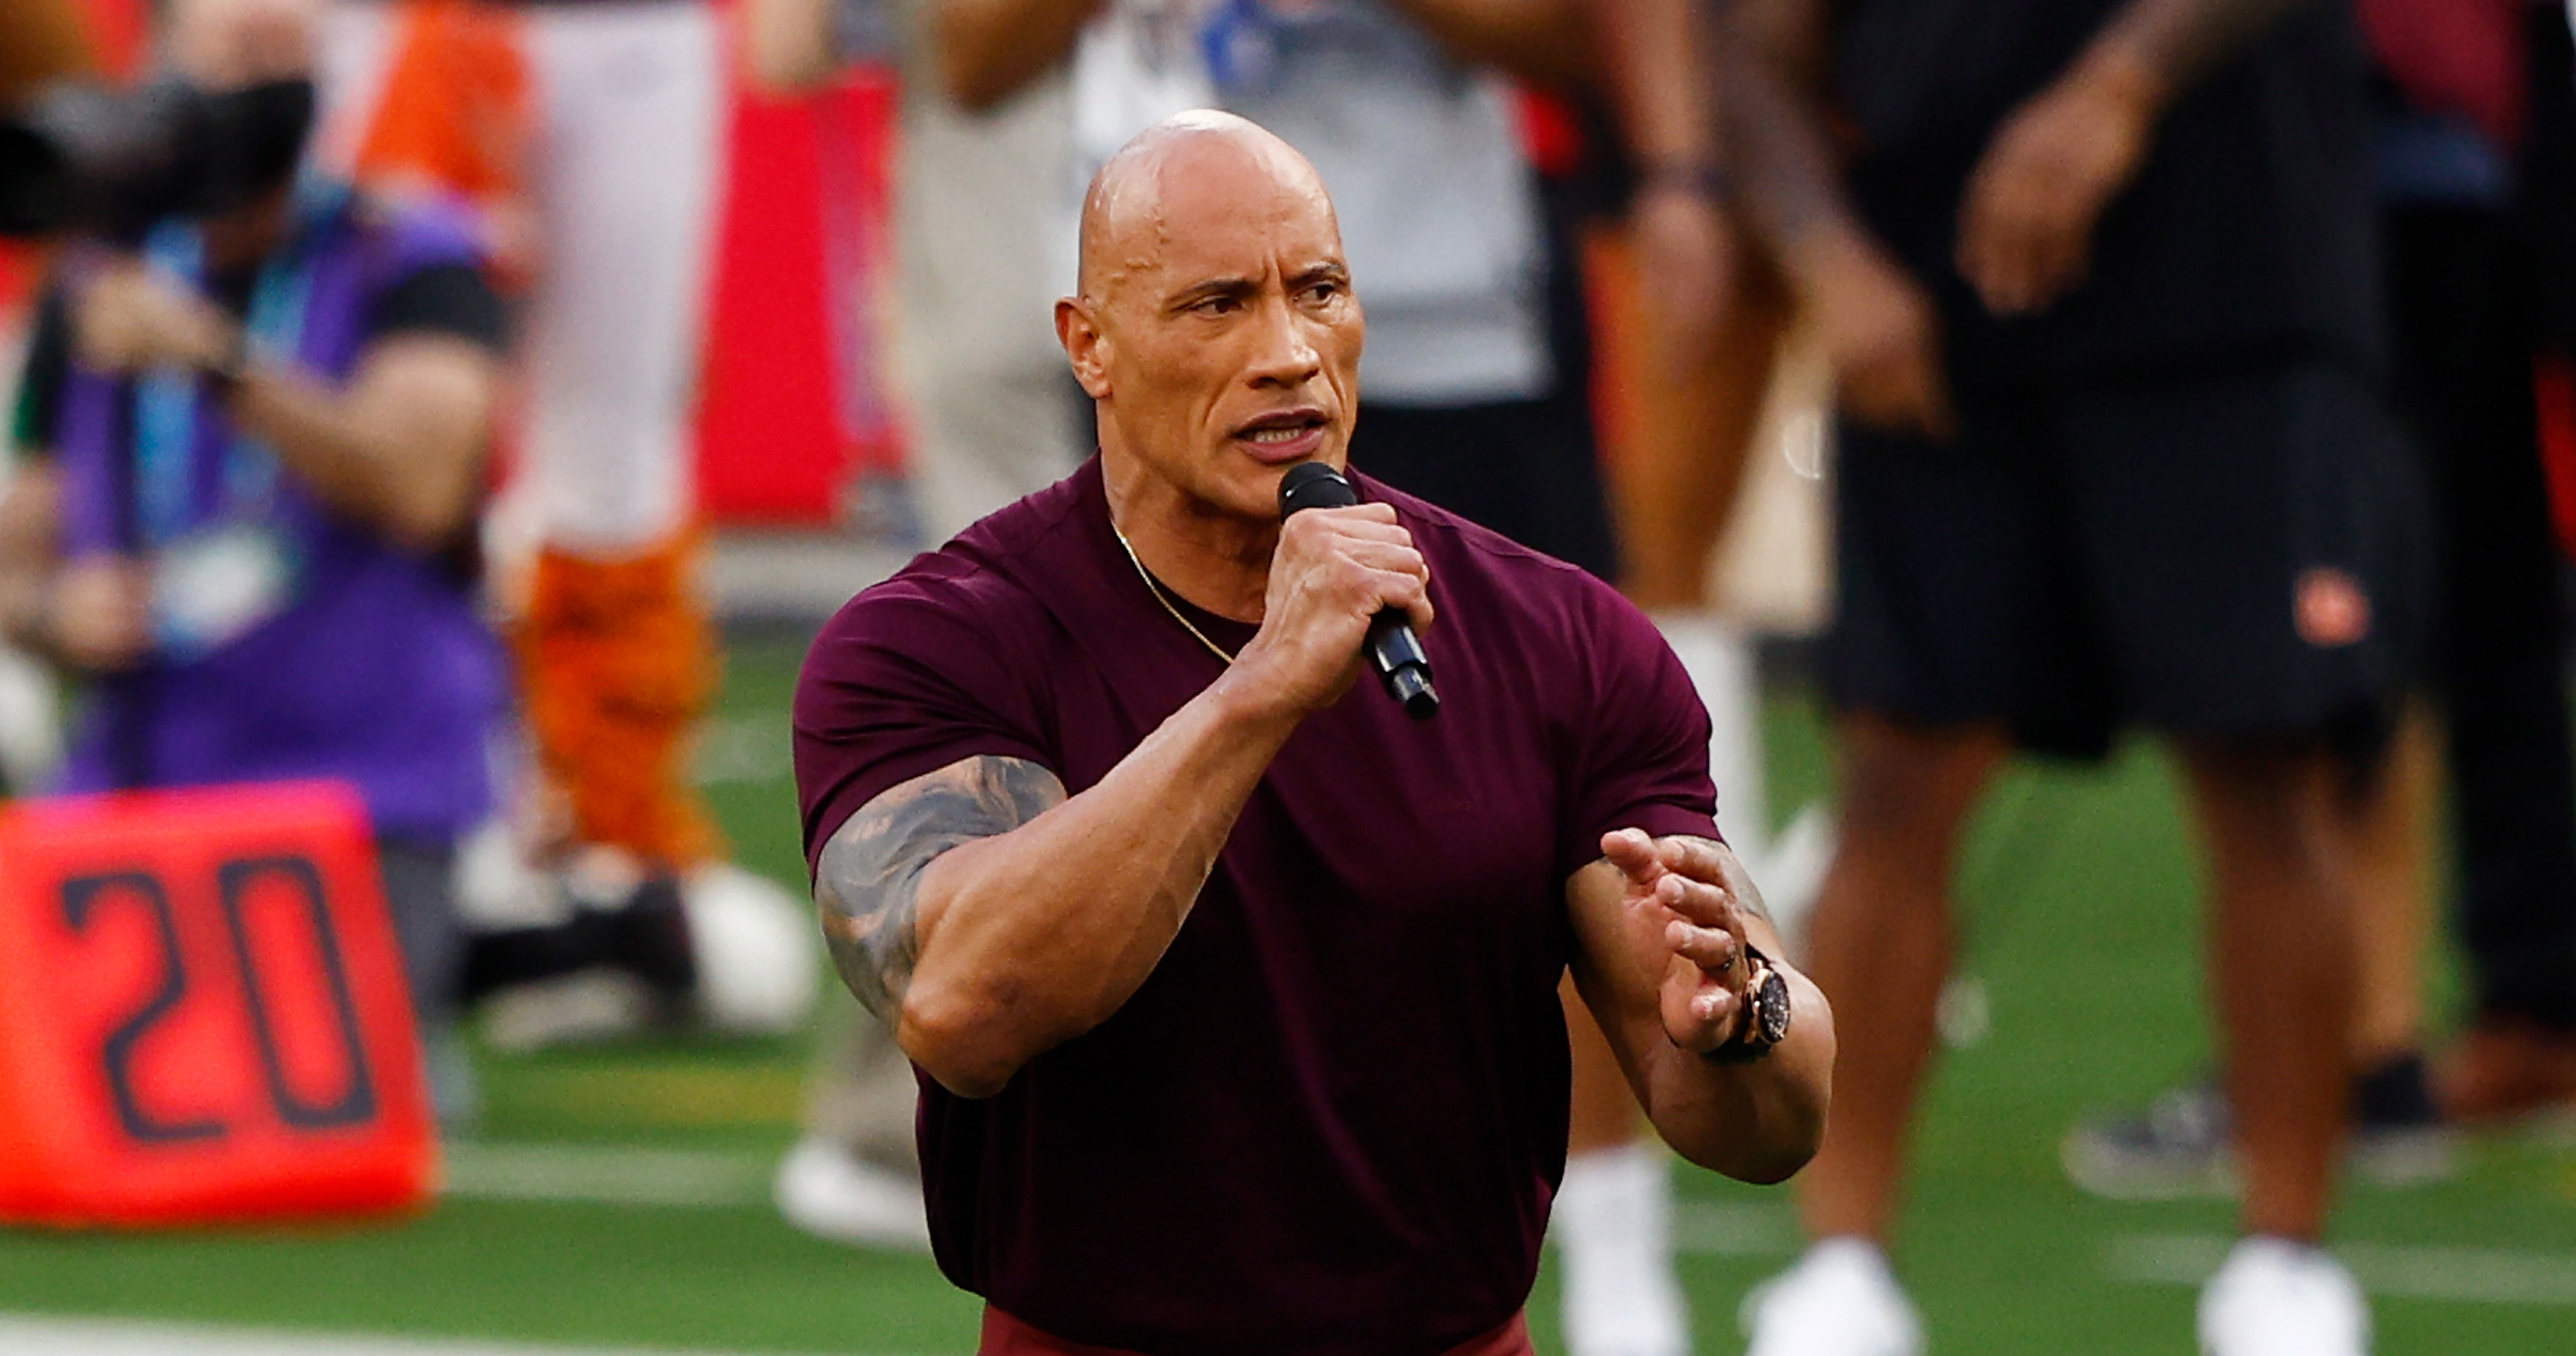 Video The Rock Gives PreGame Hype Speech on Field Ahead of Super Bowl